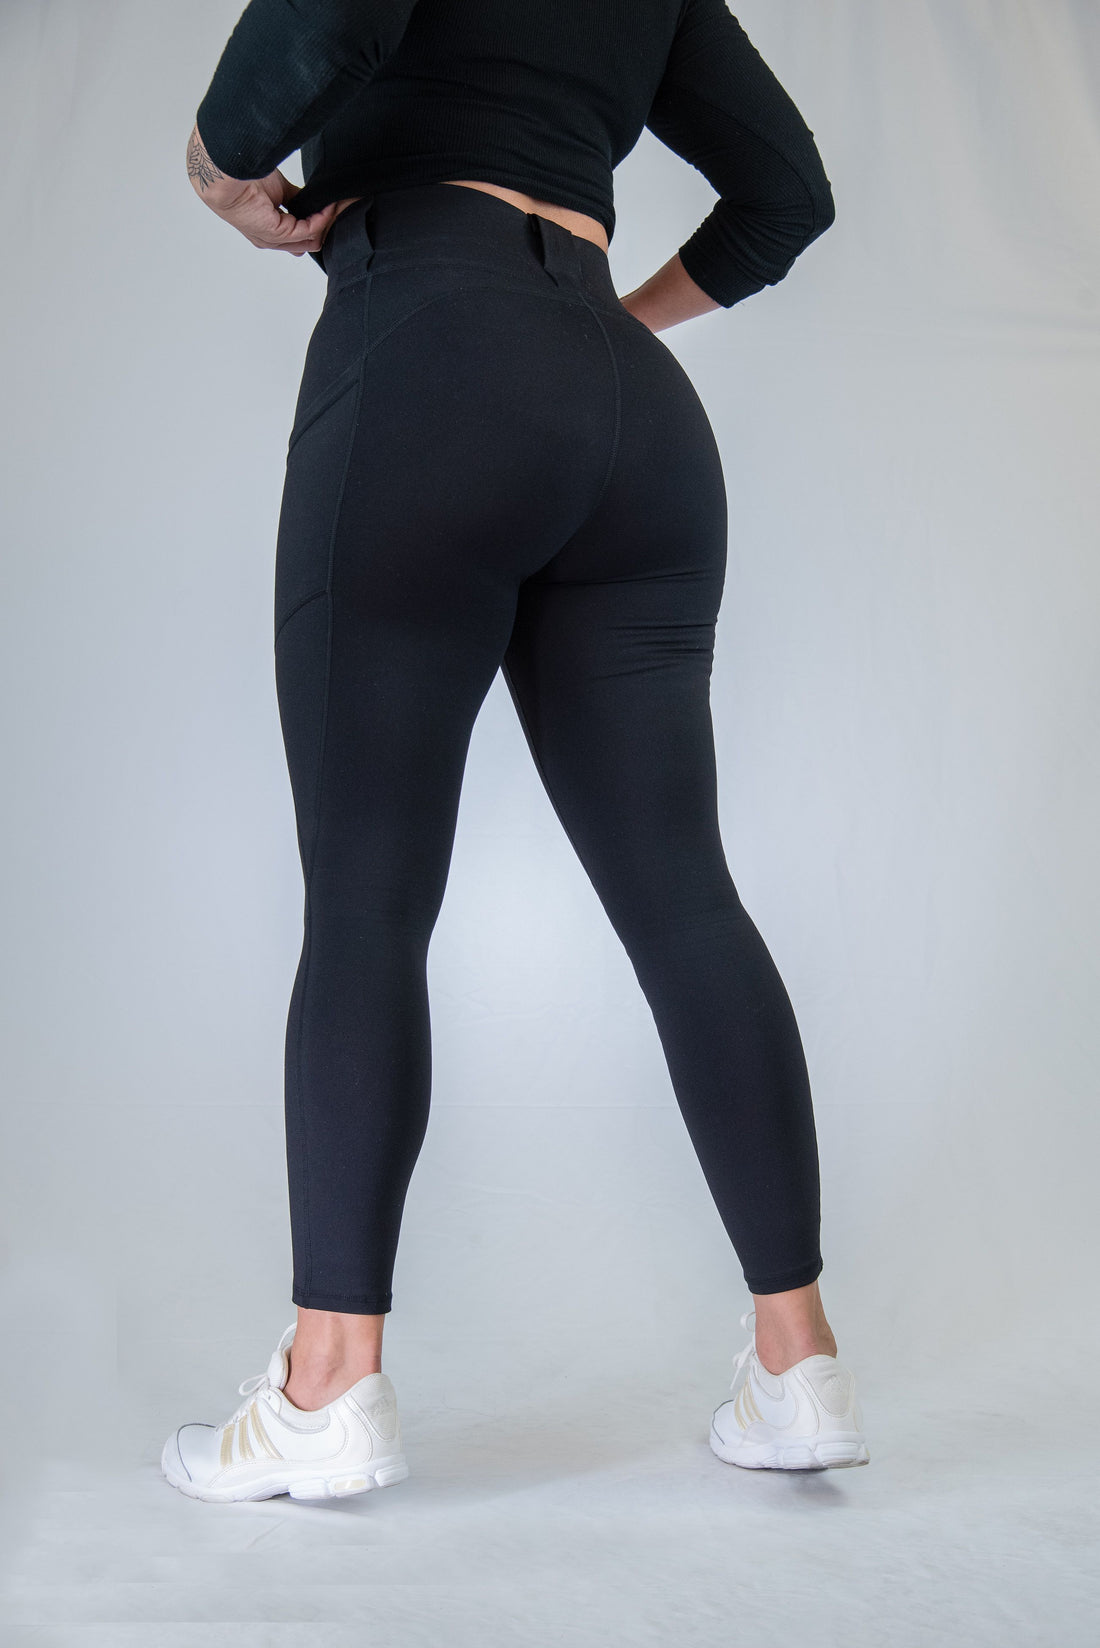 Simply the Best Leggings - TC and TC2 Black - Curved and Dangerous